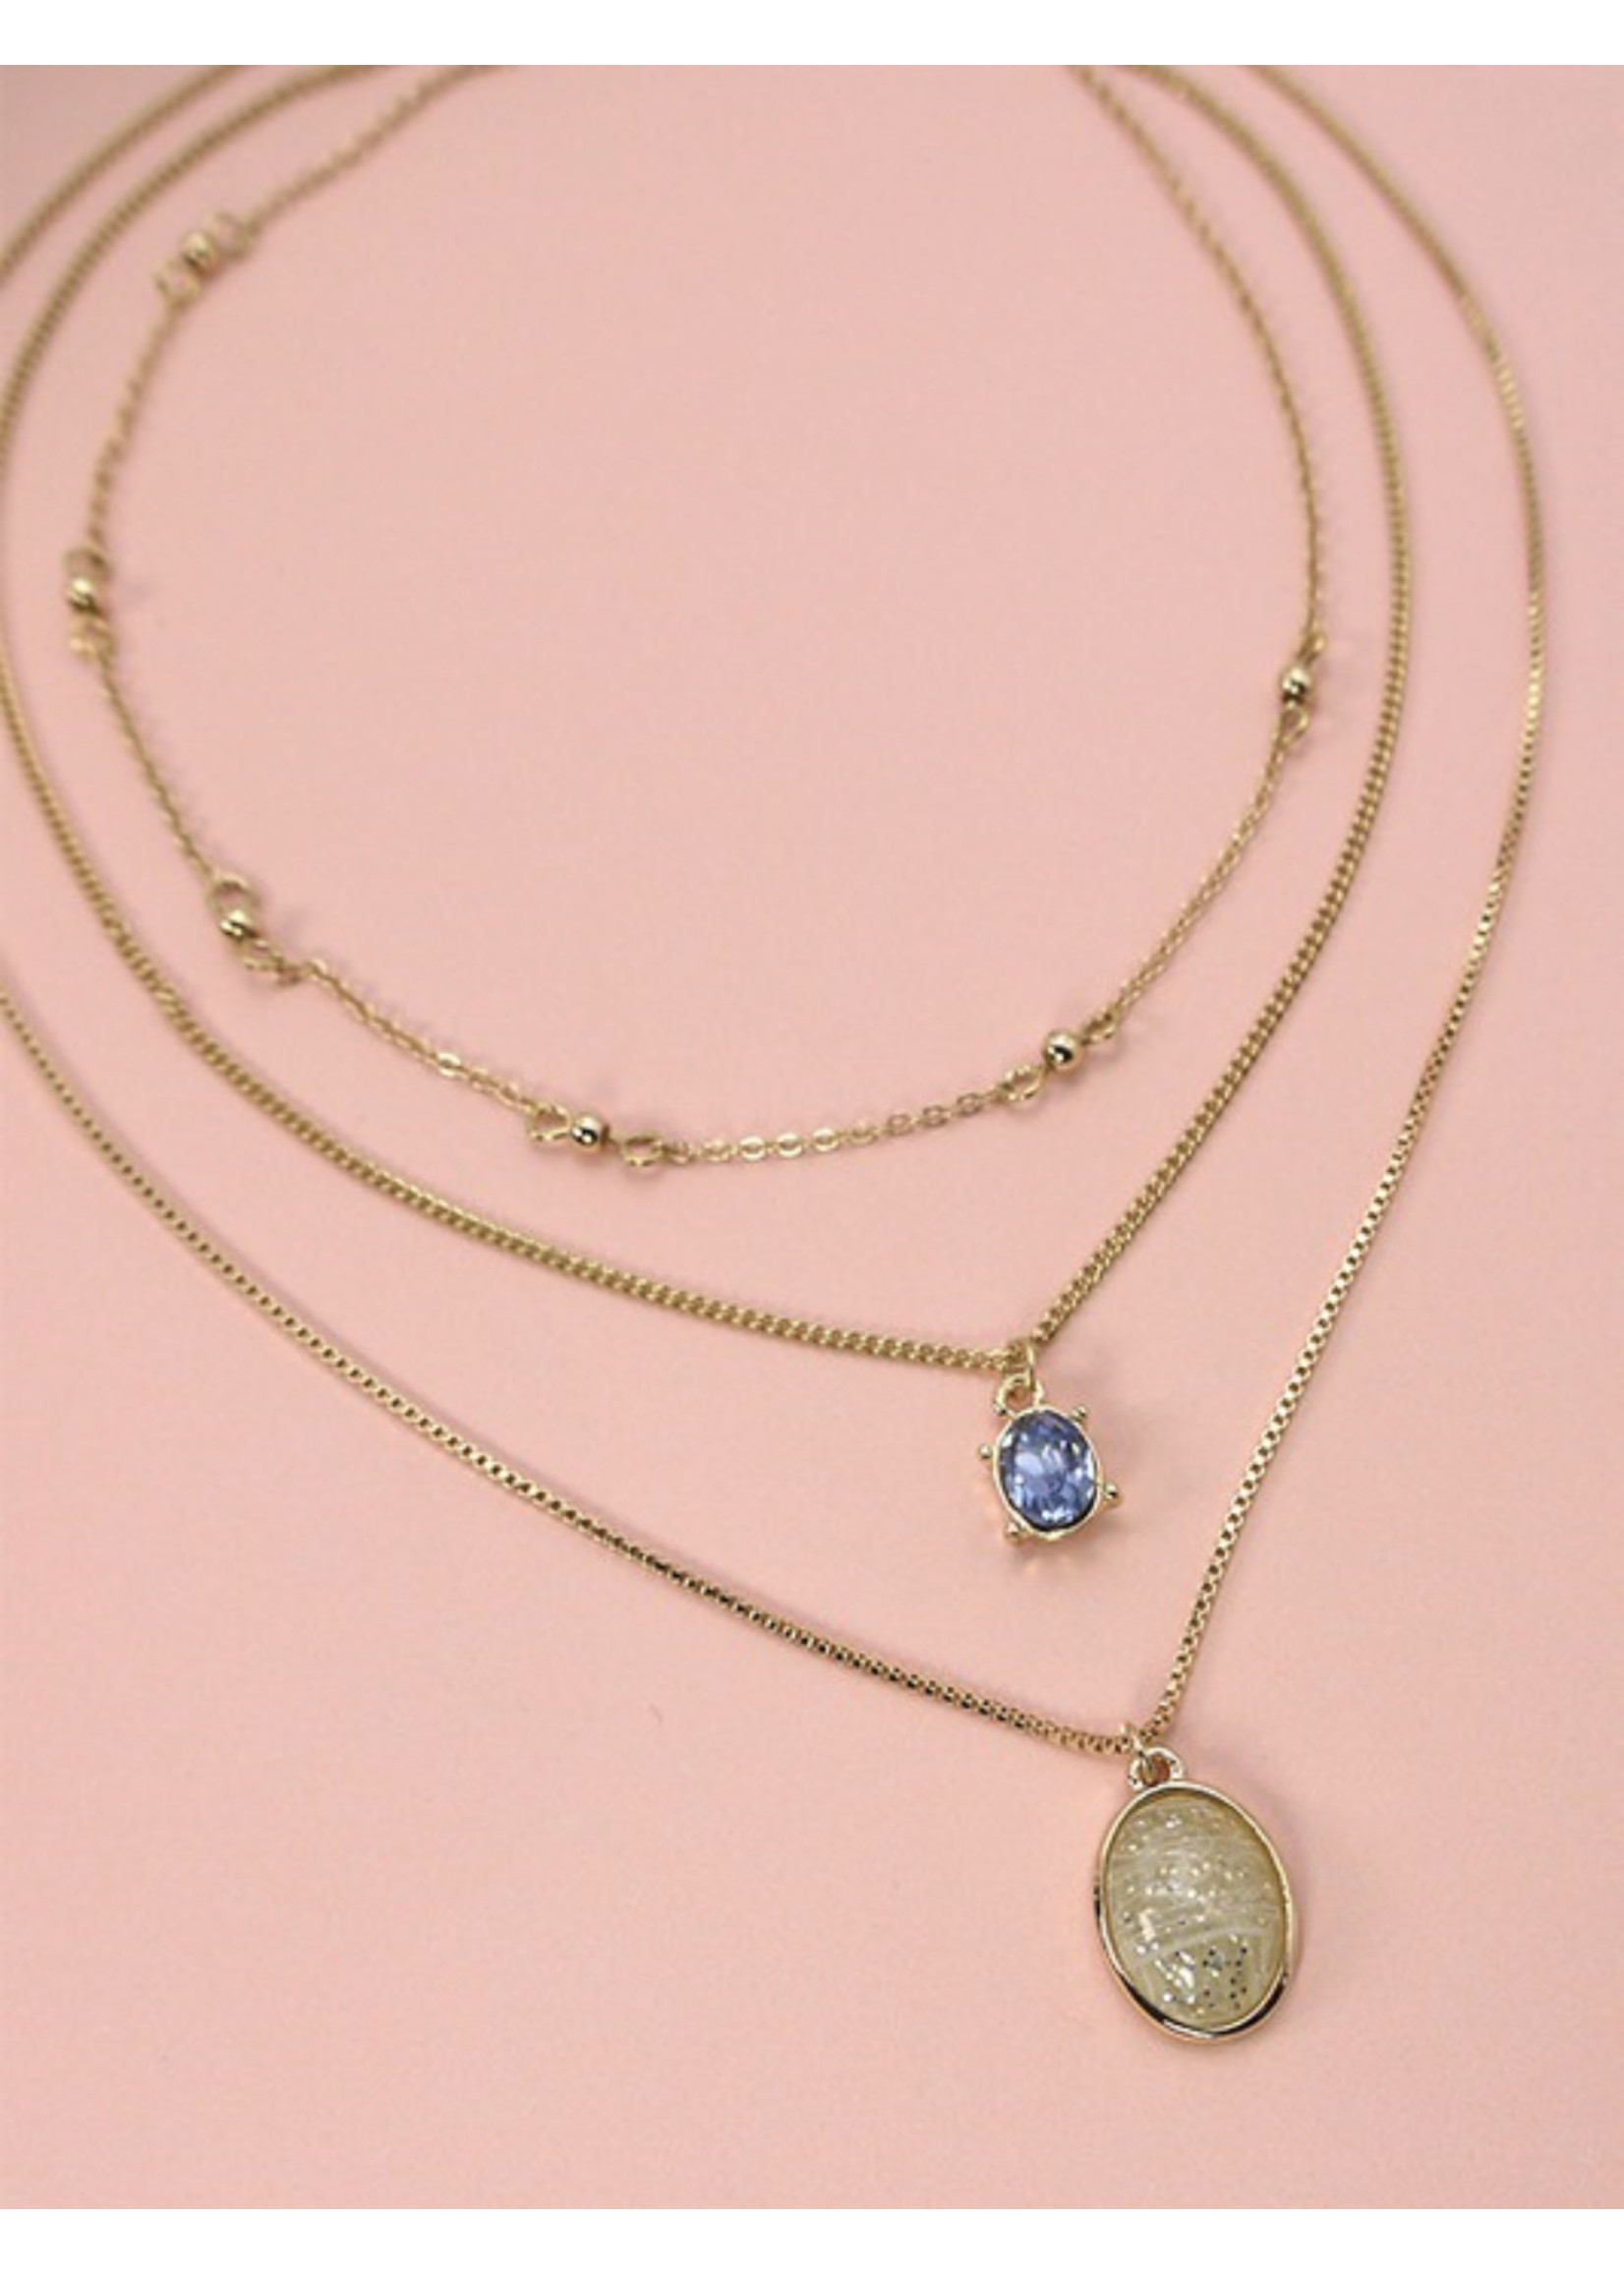 Wall-Gold classic necklace with Charm